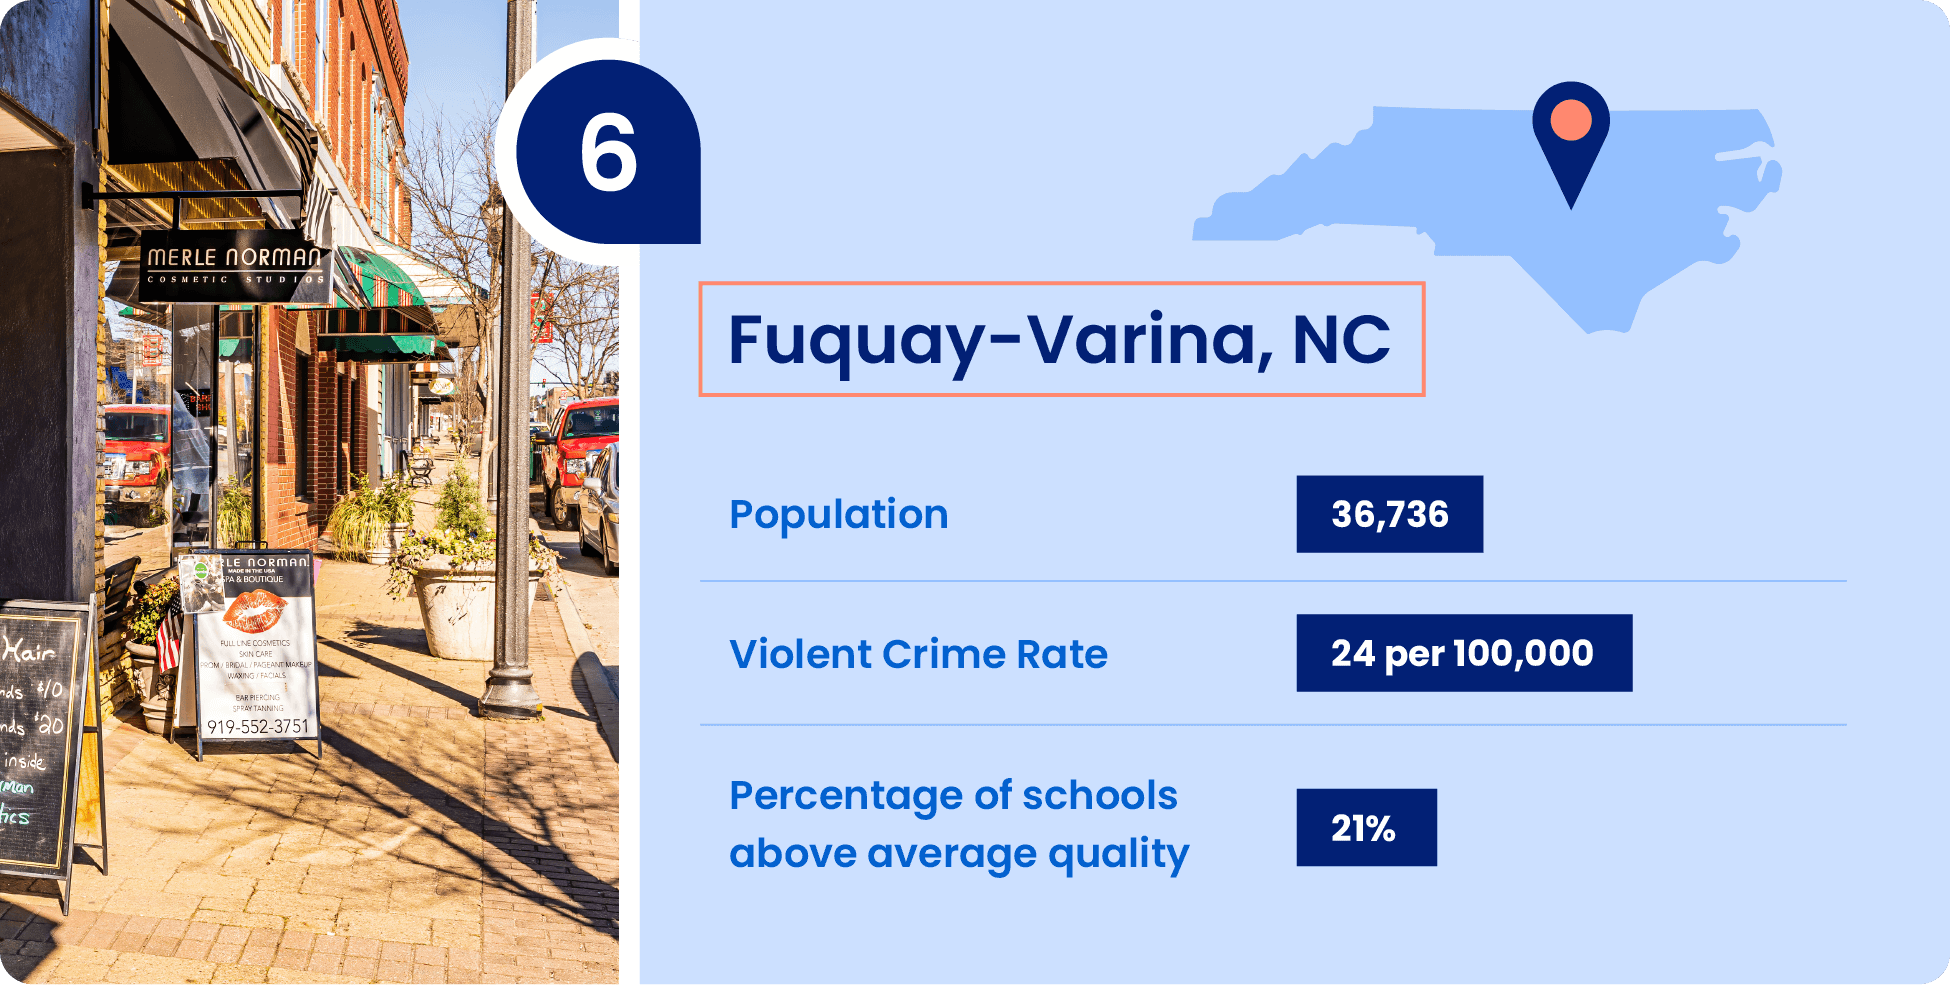 Image shows key information that make Fuquay-Varina, North Carolina a great place to raise a family.